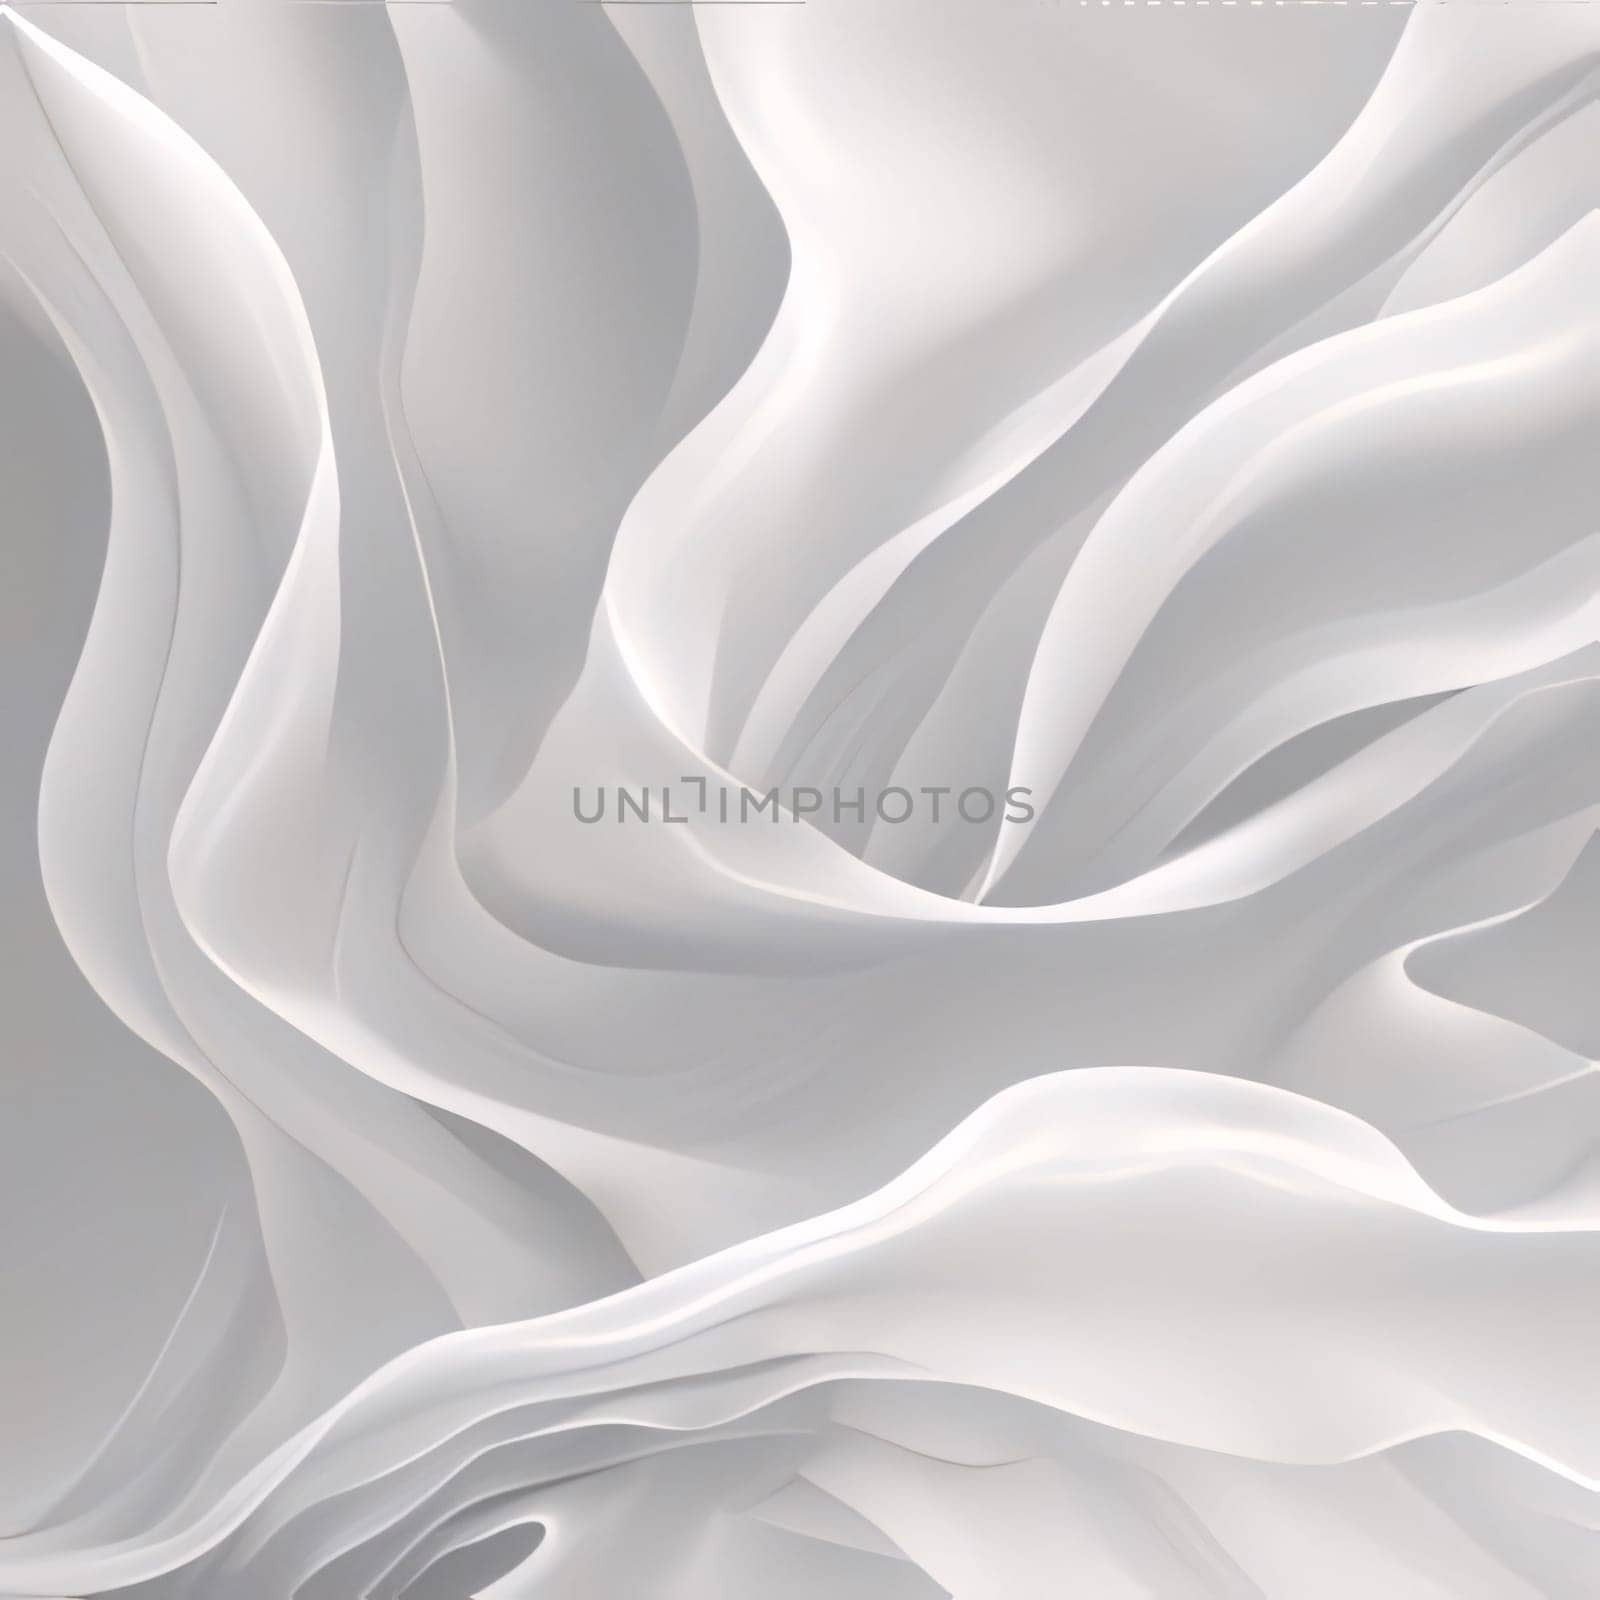 Abstract background design: White abstract wavy background. 3d rendering, 3d illustration.